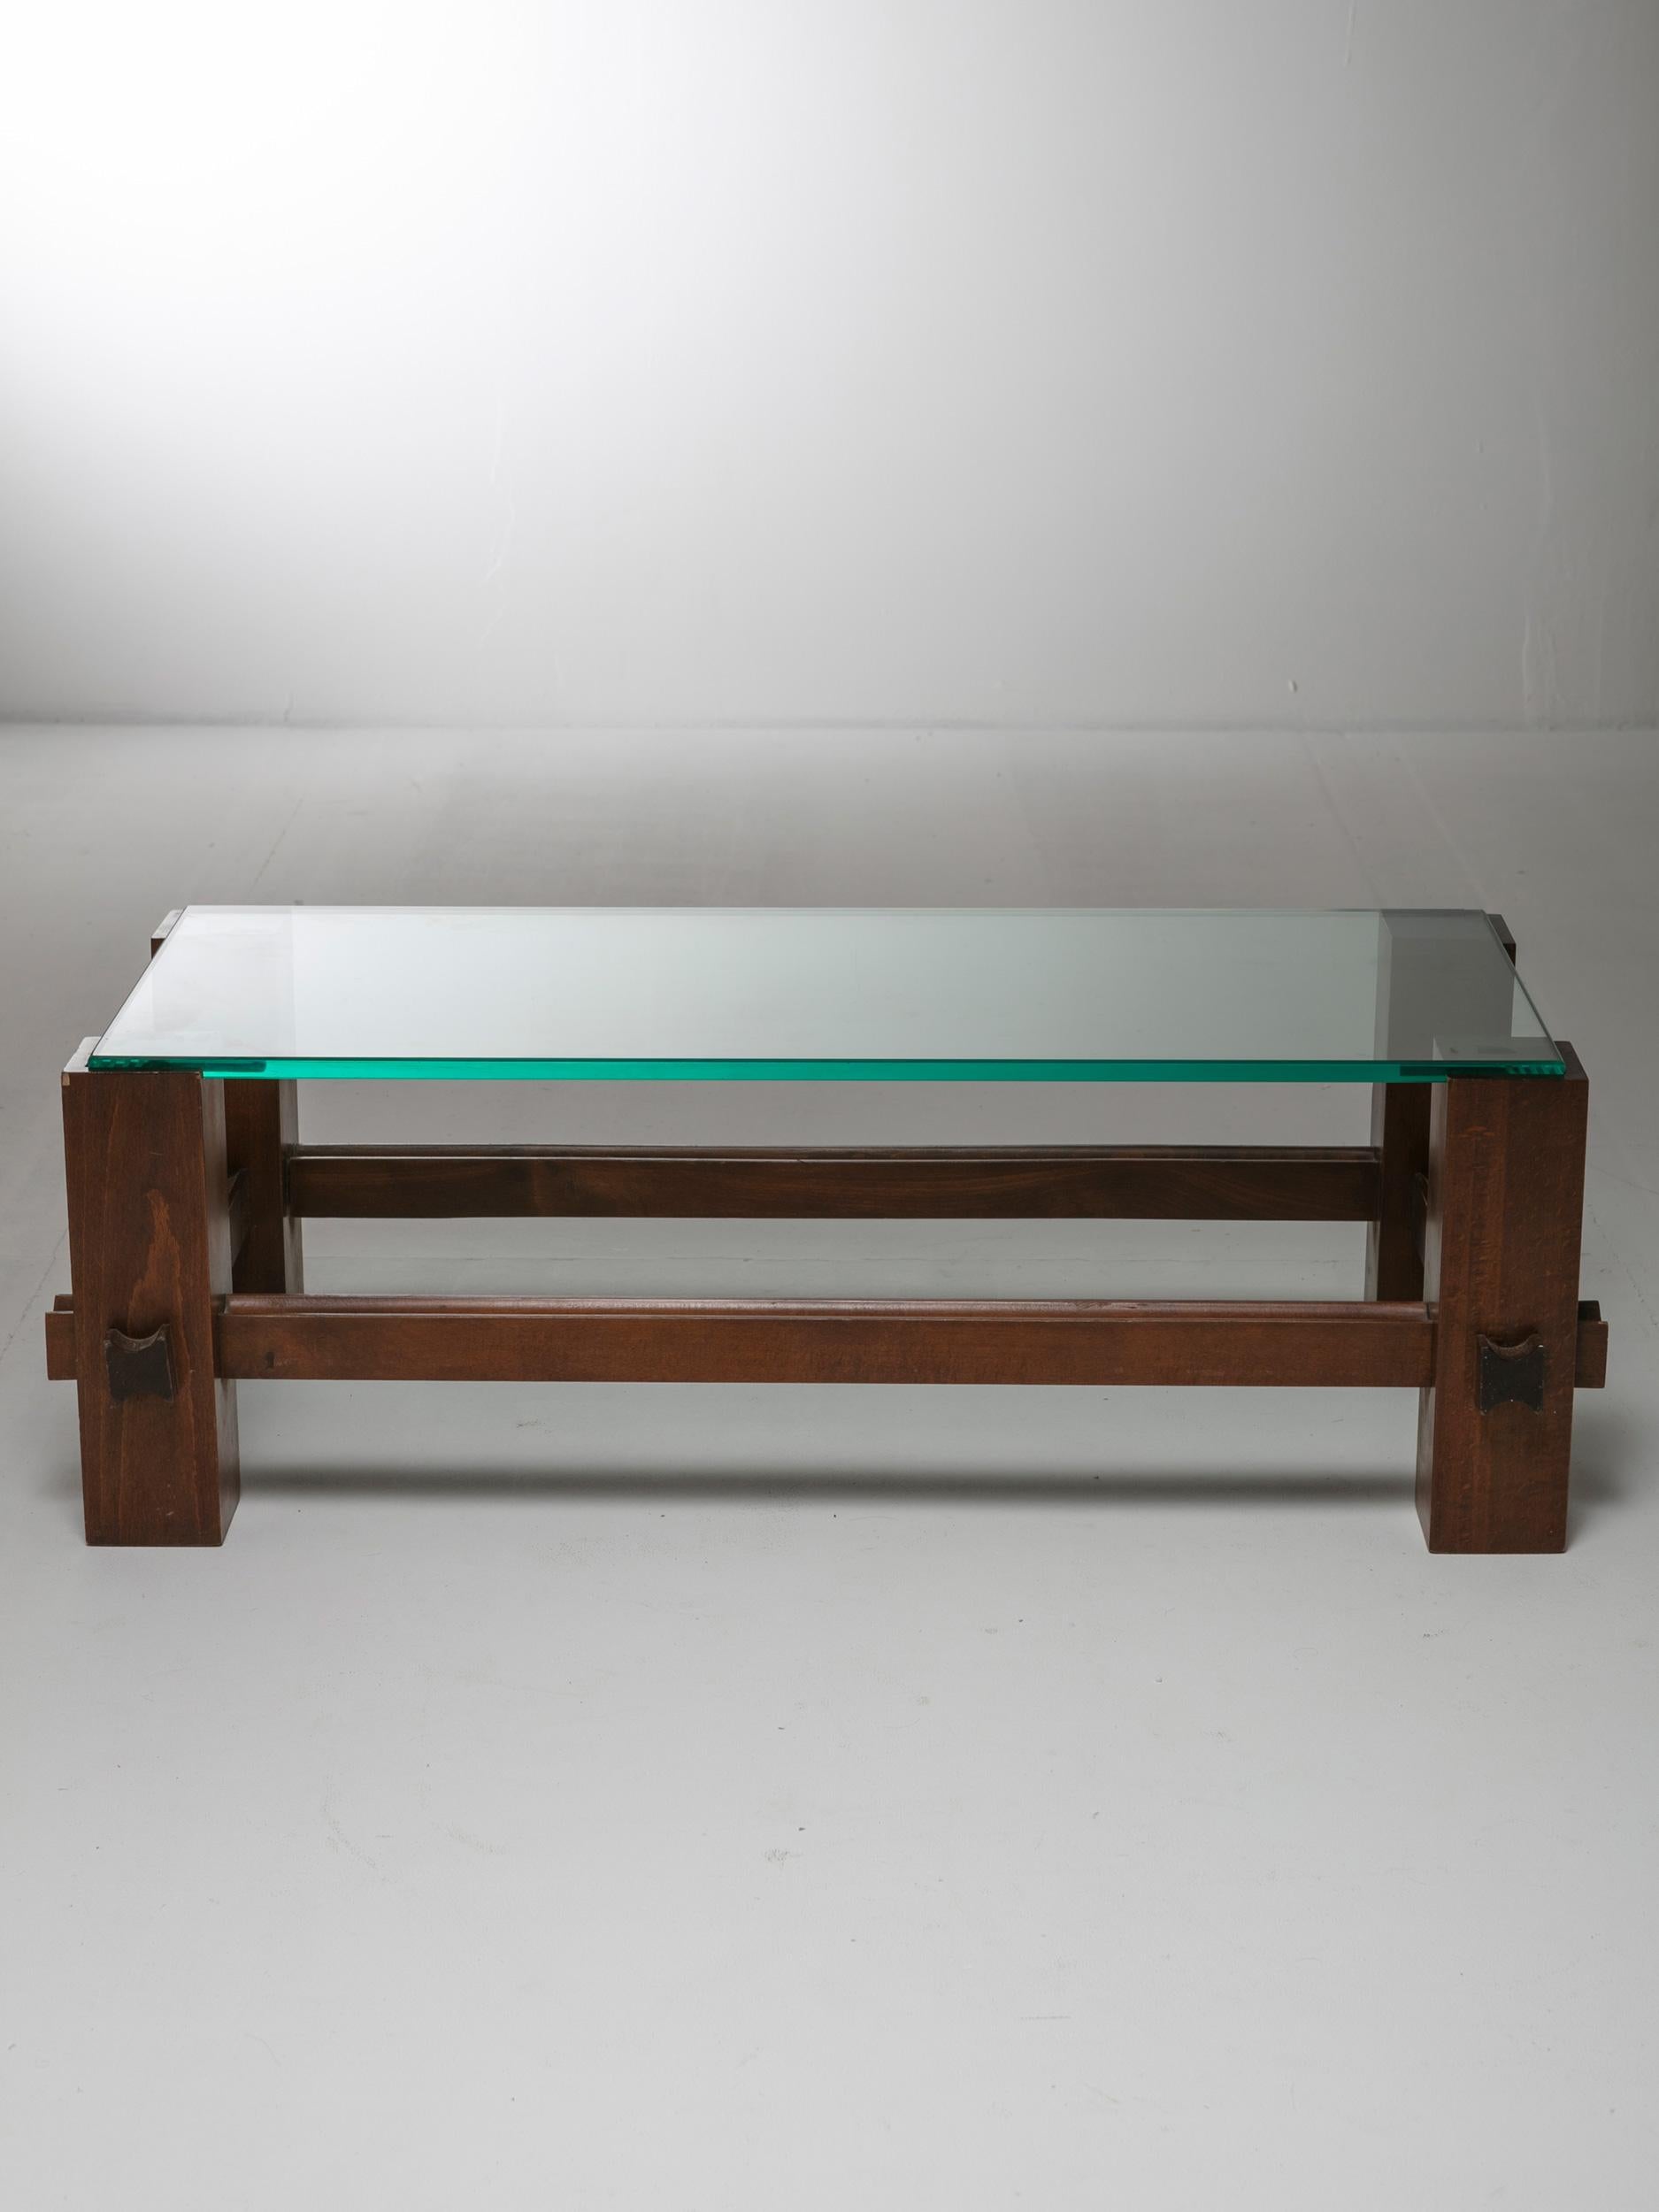 Coffee table model 2461 manufactured by Fontana Arte.
Walnut frame supporting a thick crystal top.